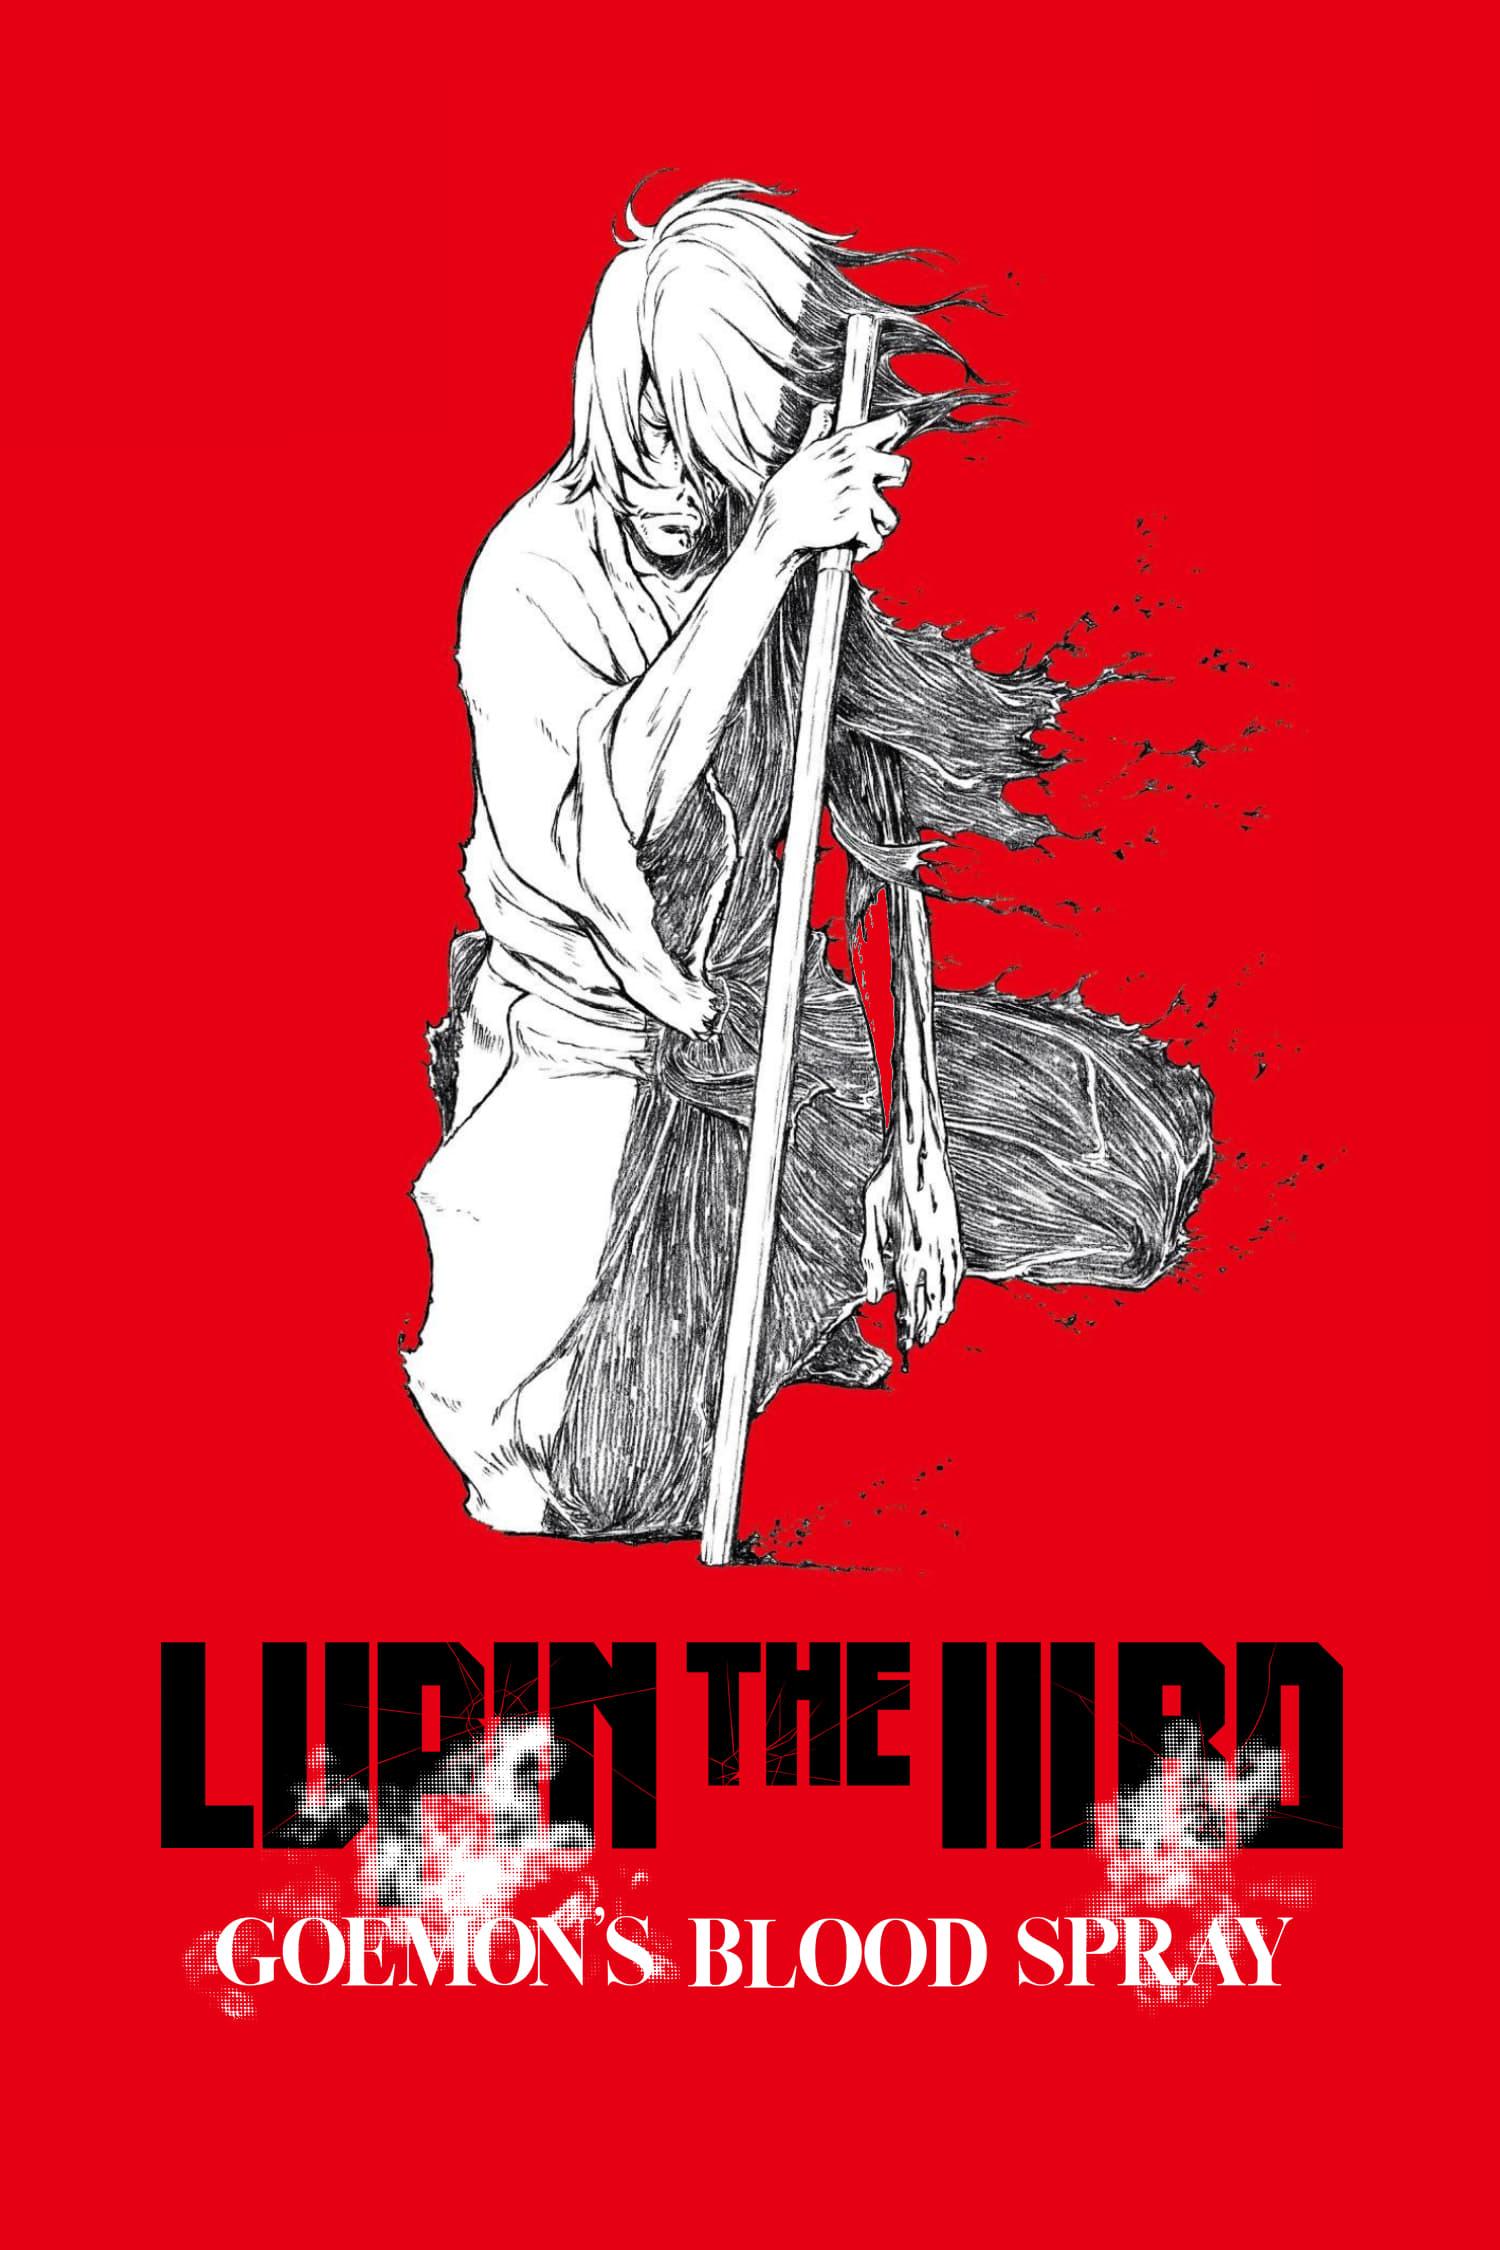 Lupin the Third: Goemon's Blood Spray poster